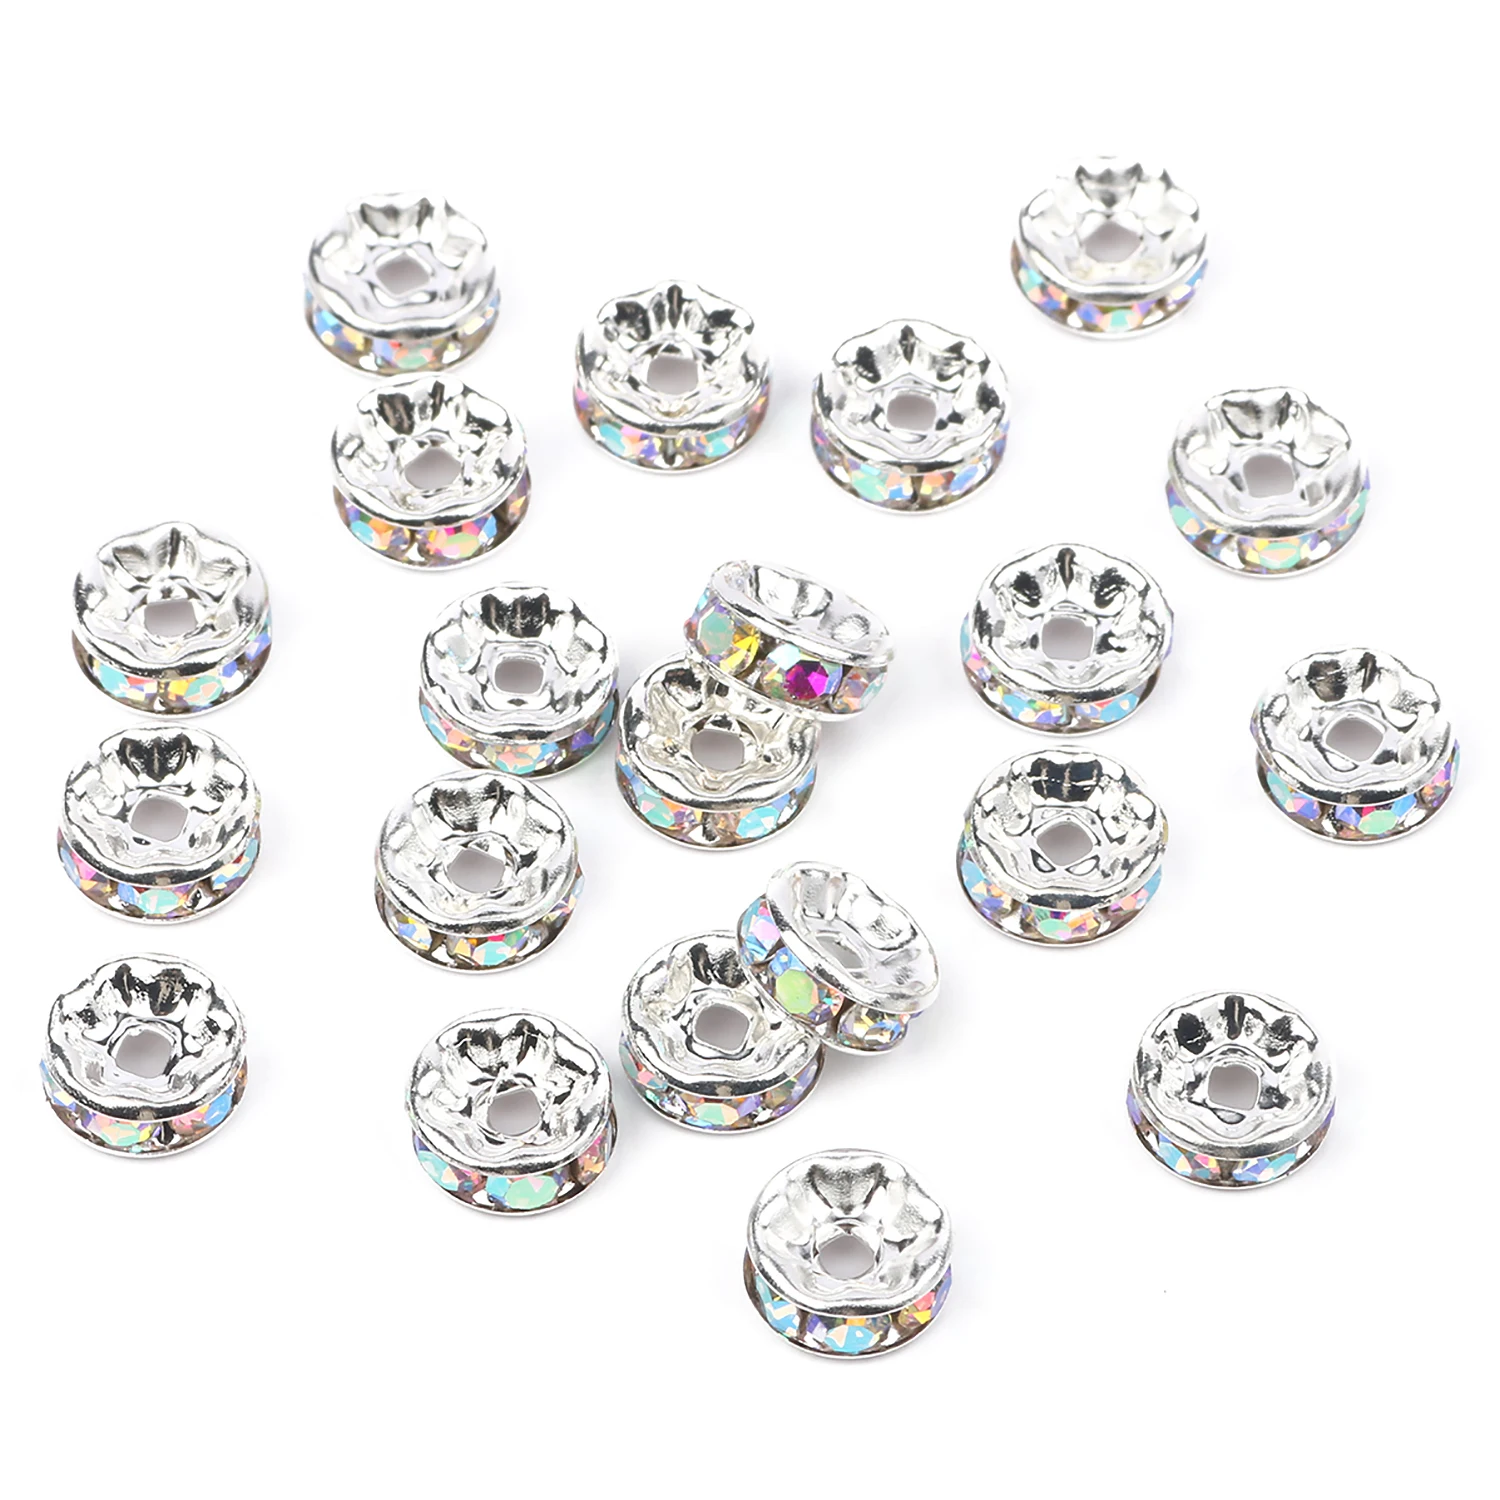 100pcs Lots Shiny Crystal Rhinestone Spacer Beads Spacer Jewelry Making DIY 6mm 